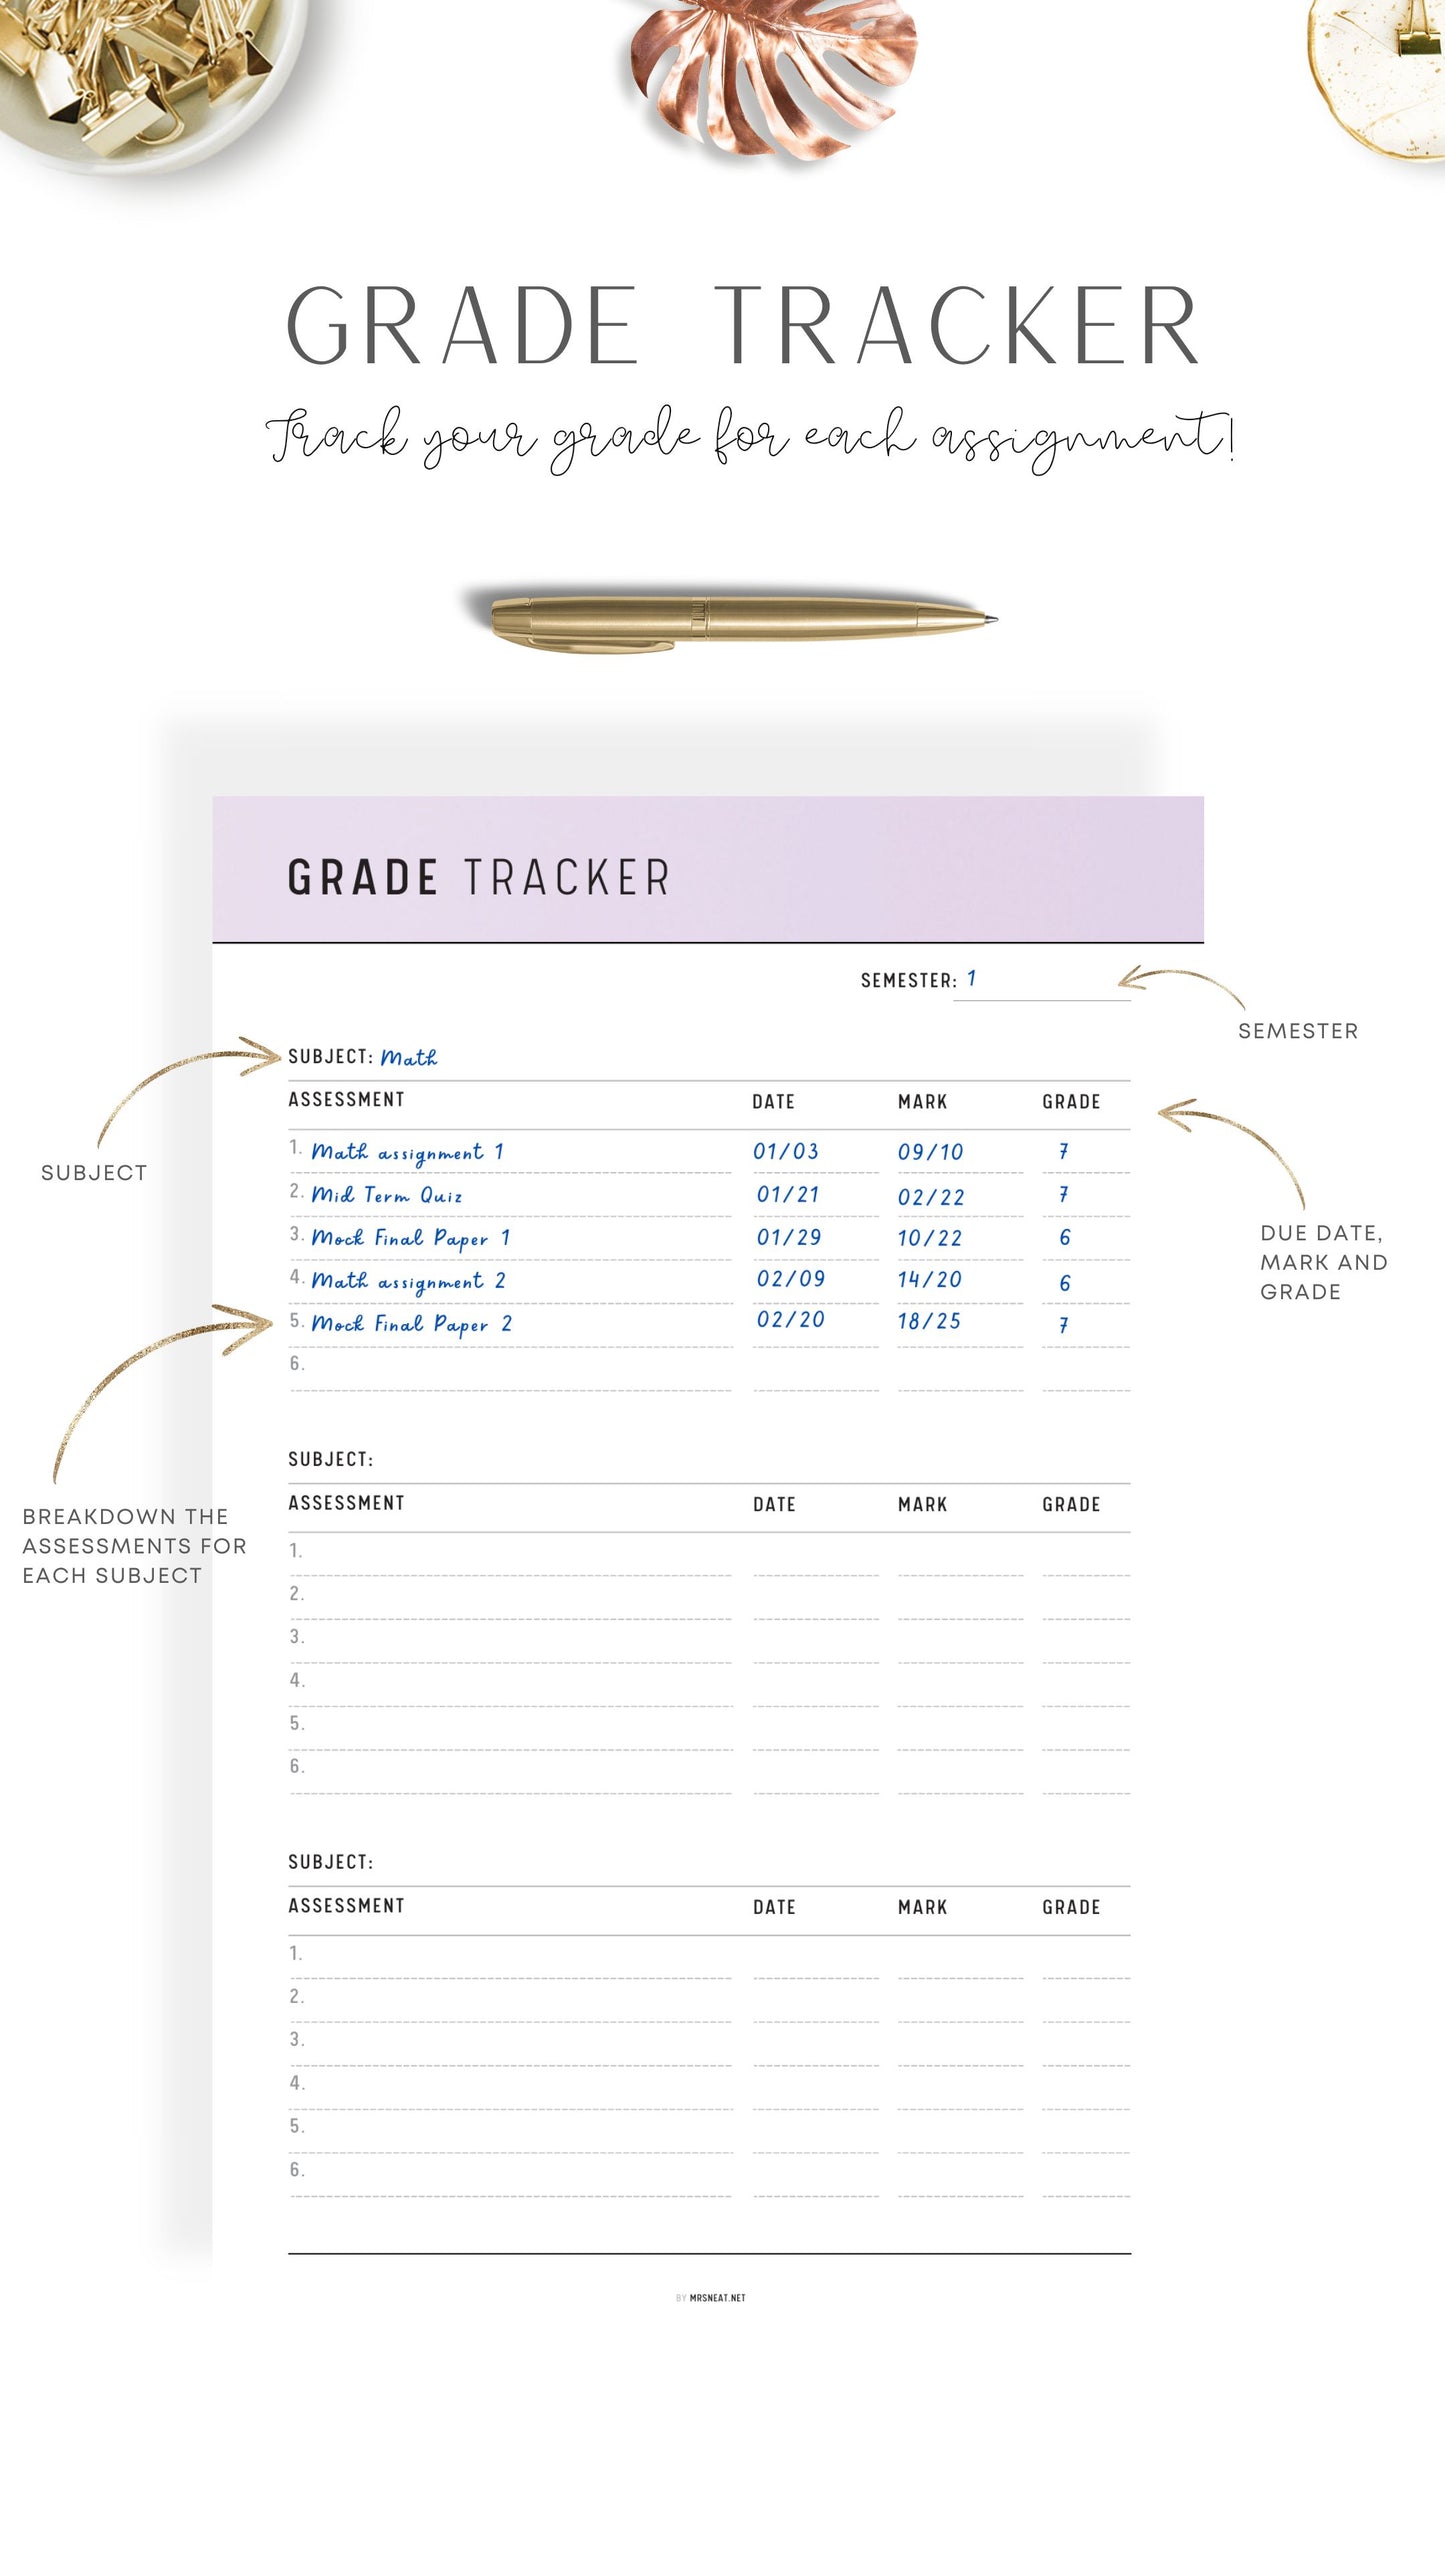 How to use Printable Grade Tracker Template